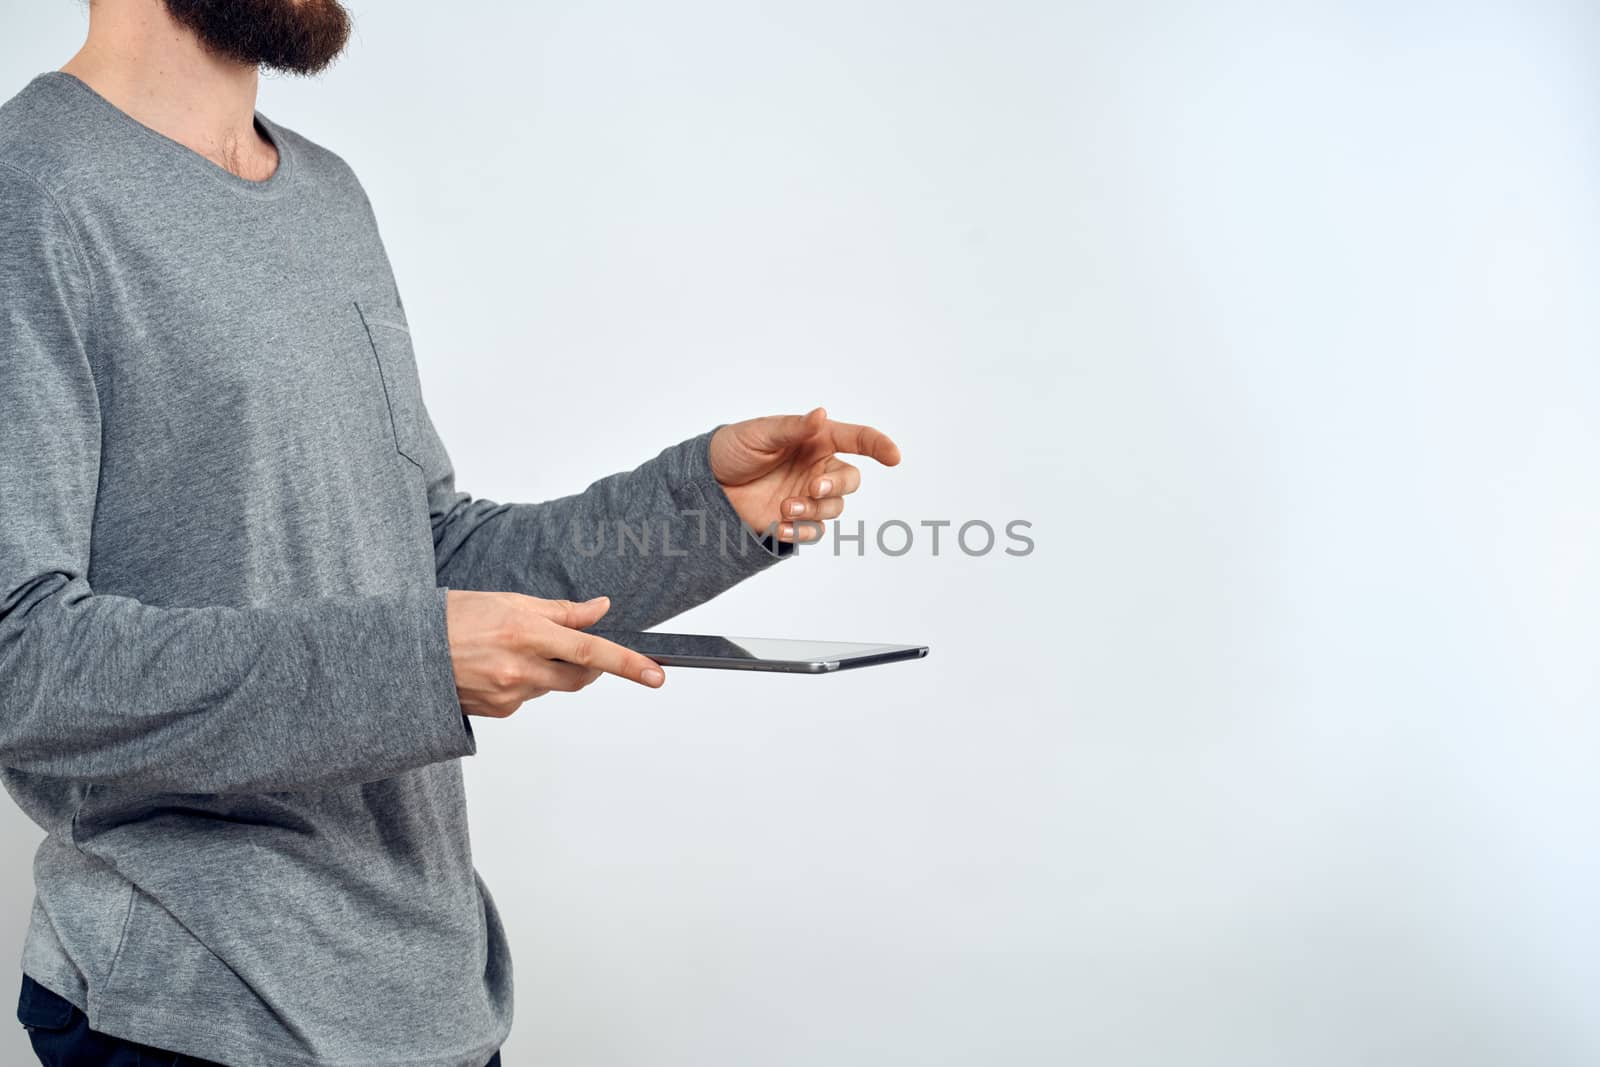 Man with tablet in hands technology lifestyle internet communication work light background cropped view. High quality photo